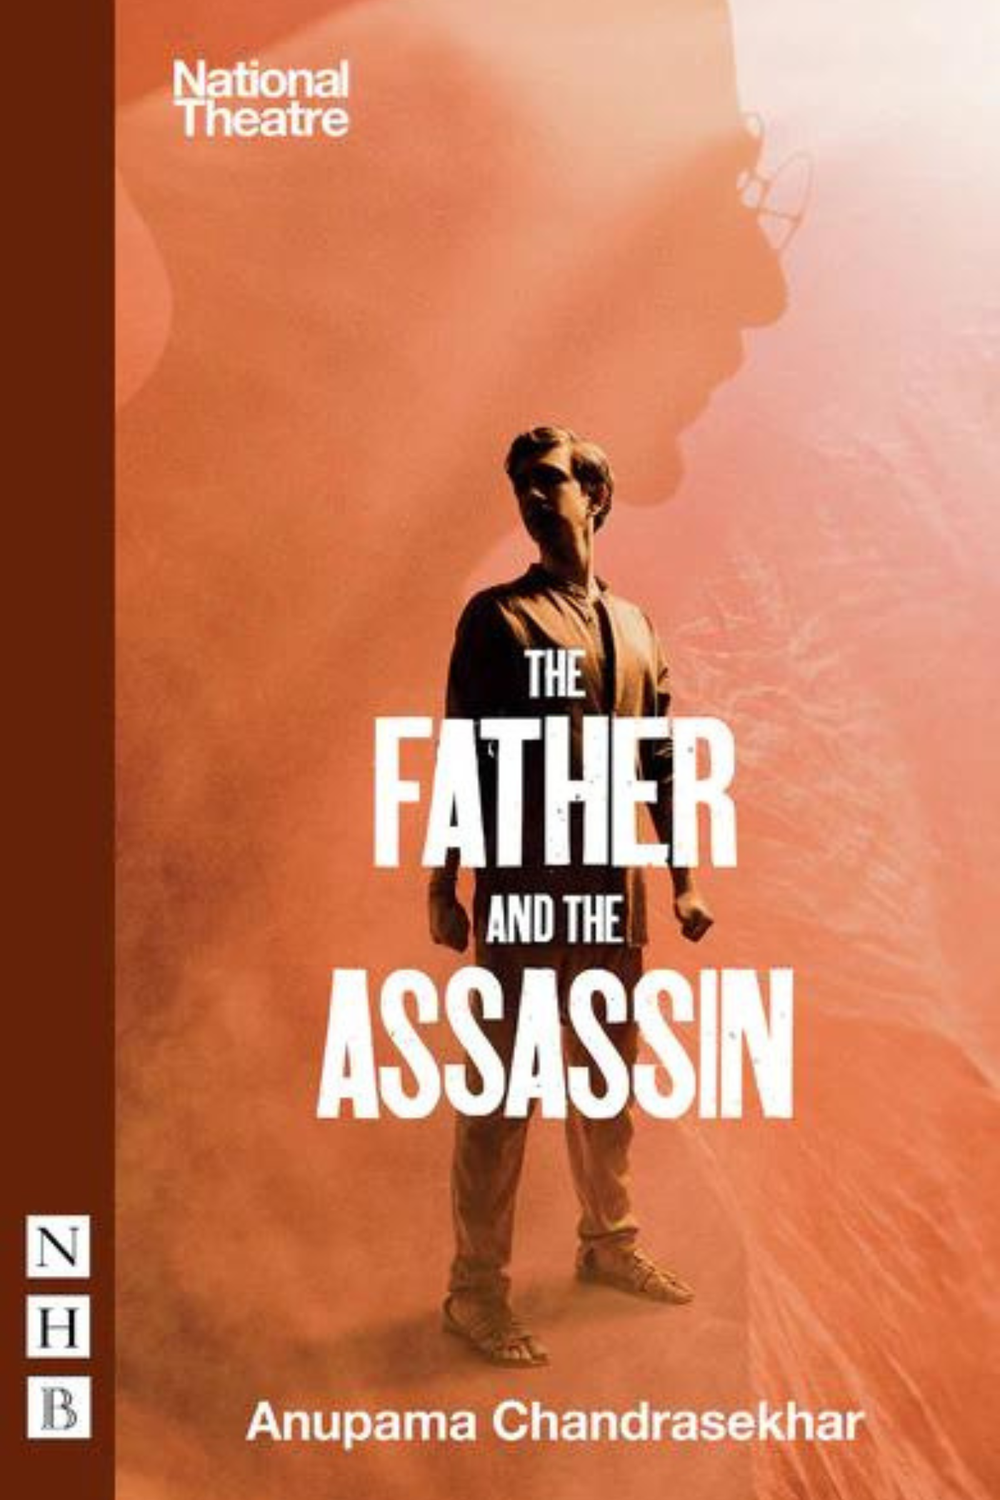 Anupama Chandrasekhar, The Father and The Assassin Poster.png